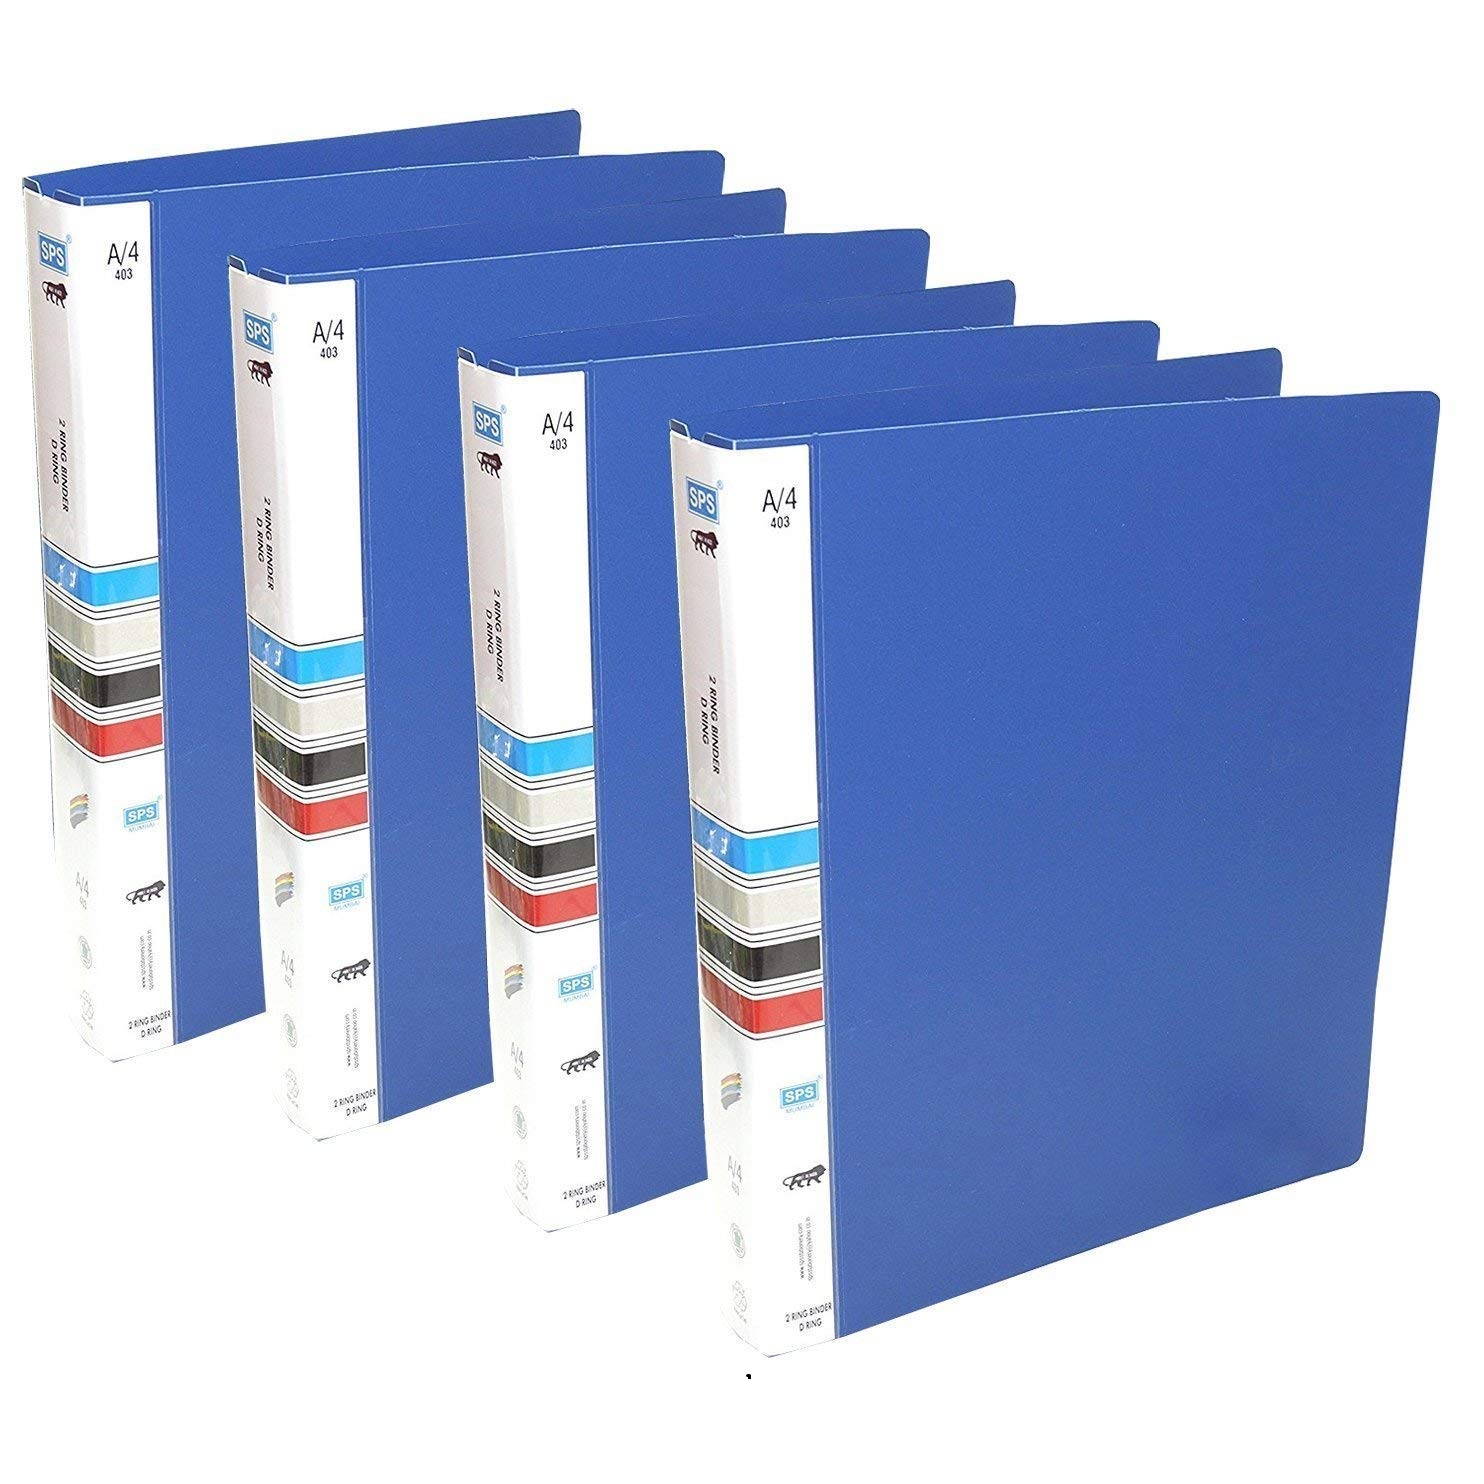 Mahavir Premium - A4 Size - 1.5 Inch - 4D (4 Hole) Ring Binder Files (Blue)  Manufacturer,Supplier and Exporter from India